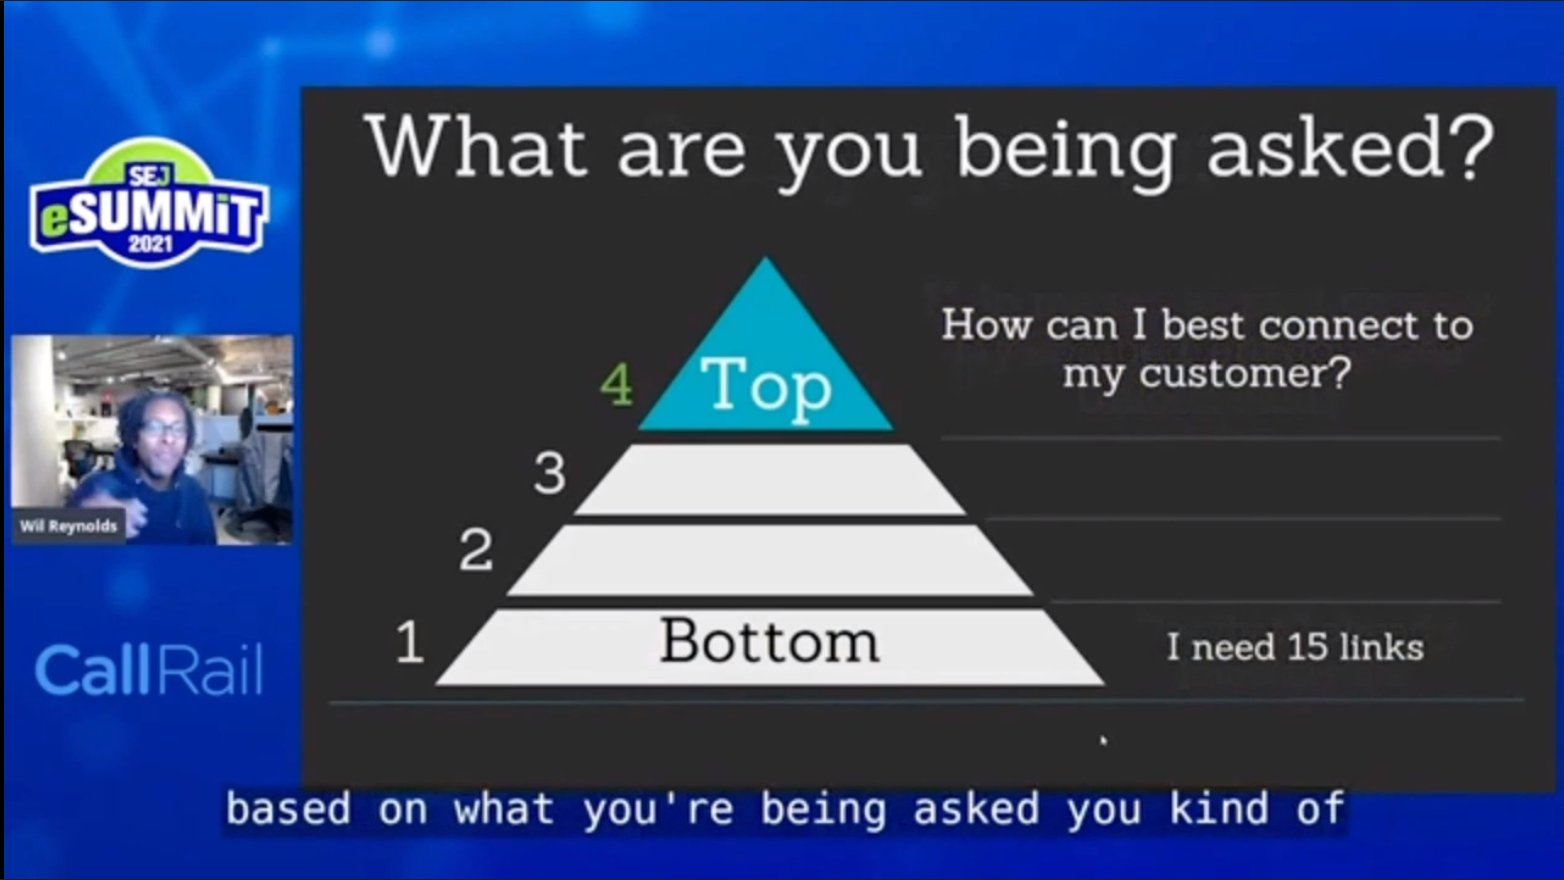 Wil Reynolds value pyramid for SEOs